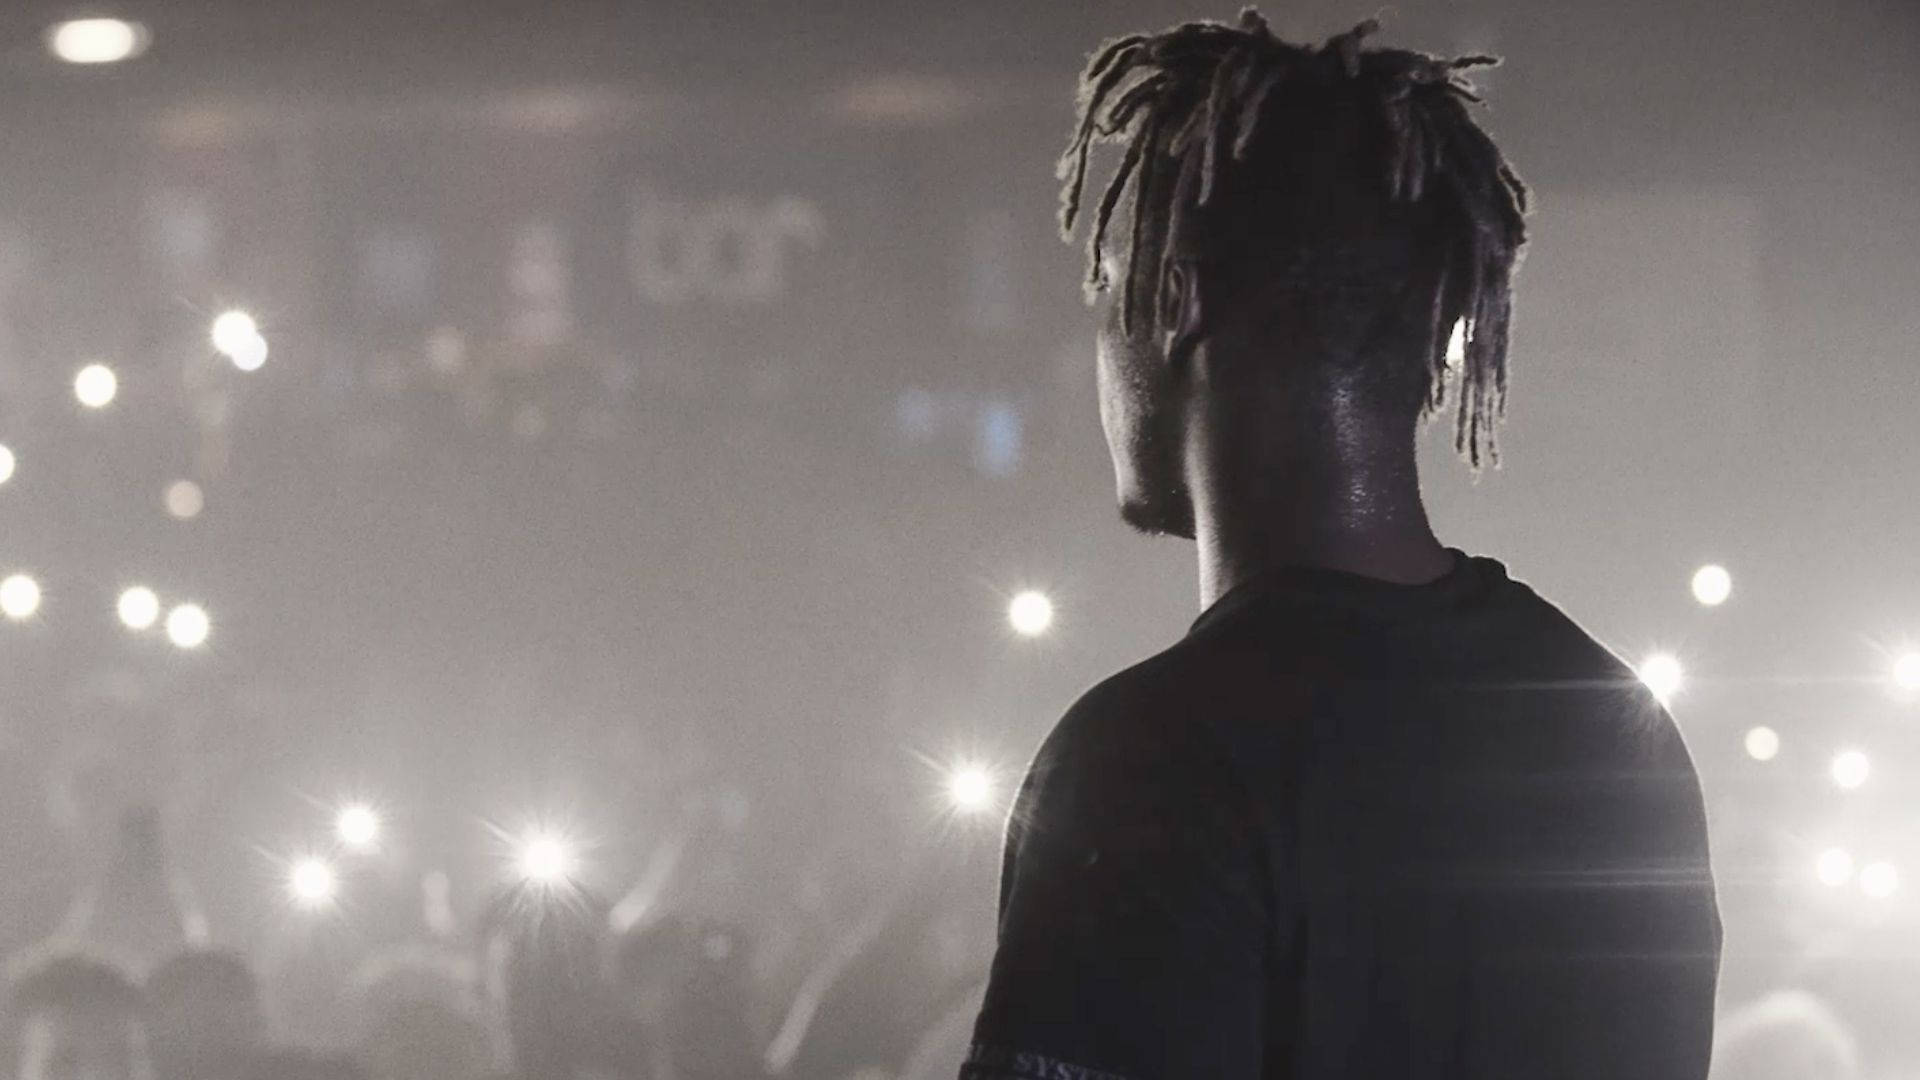 Juice Wrld brings his signature sound to the stage. Wallpaper